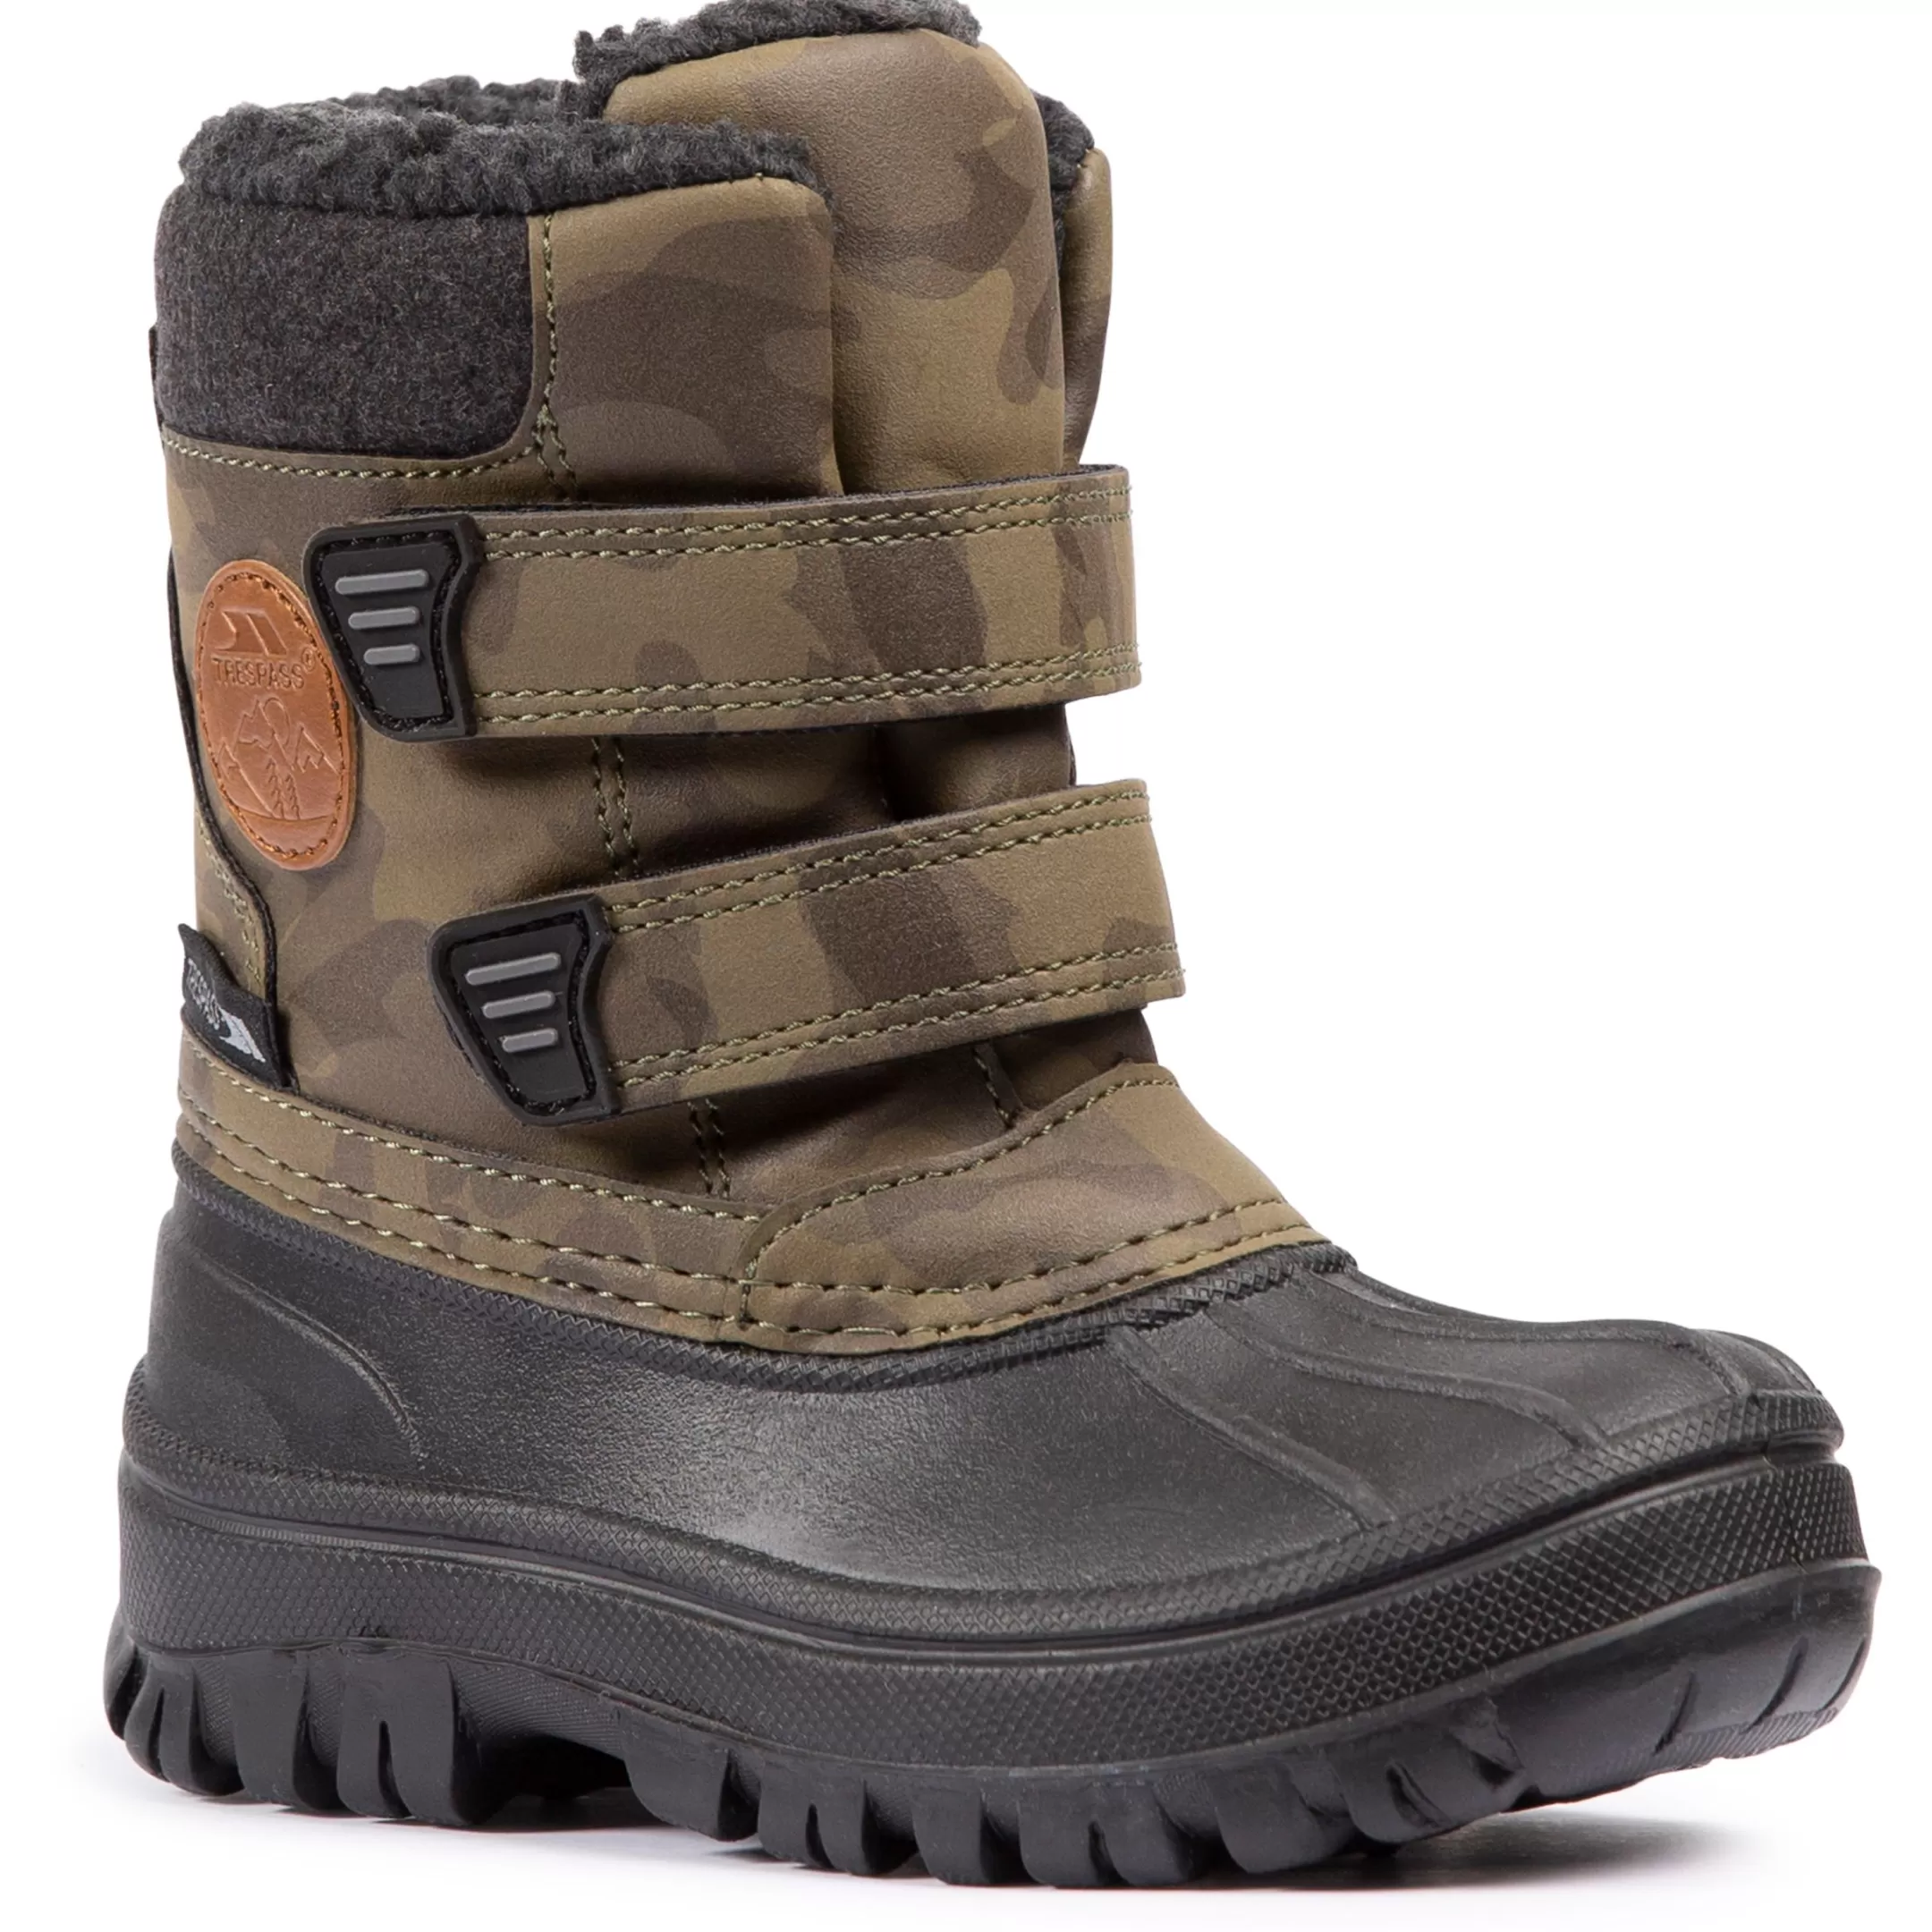 Toddlers' Unisex Snow Boots Alex | Trespass Outlet